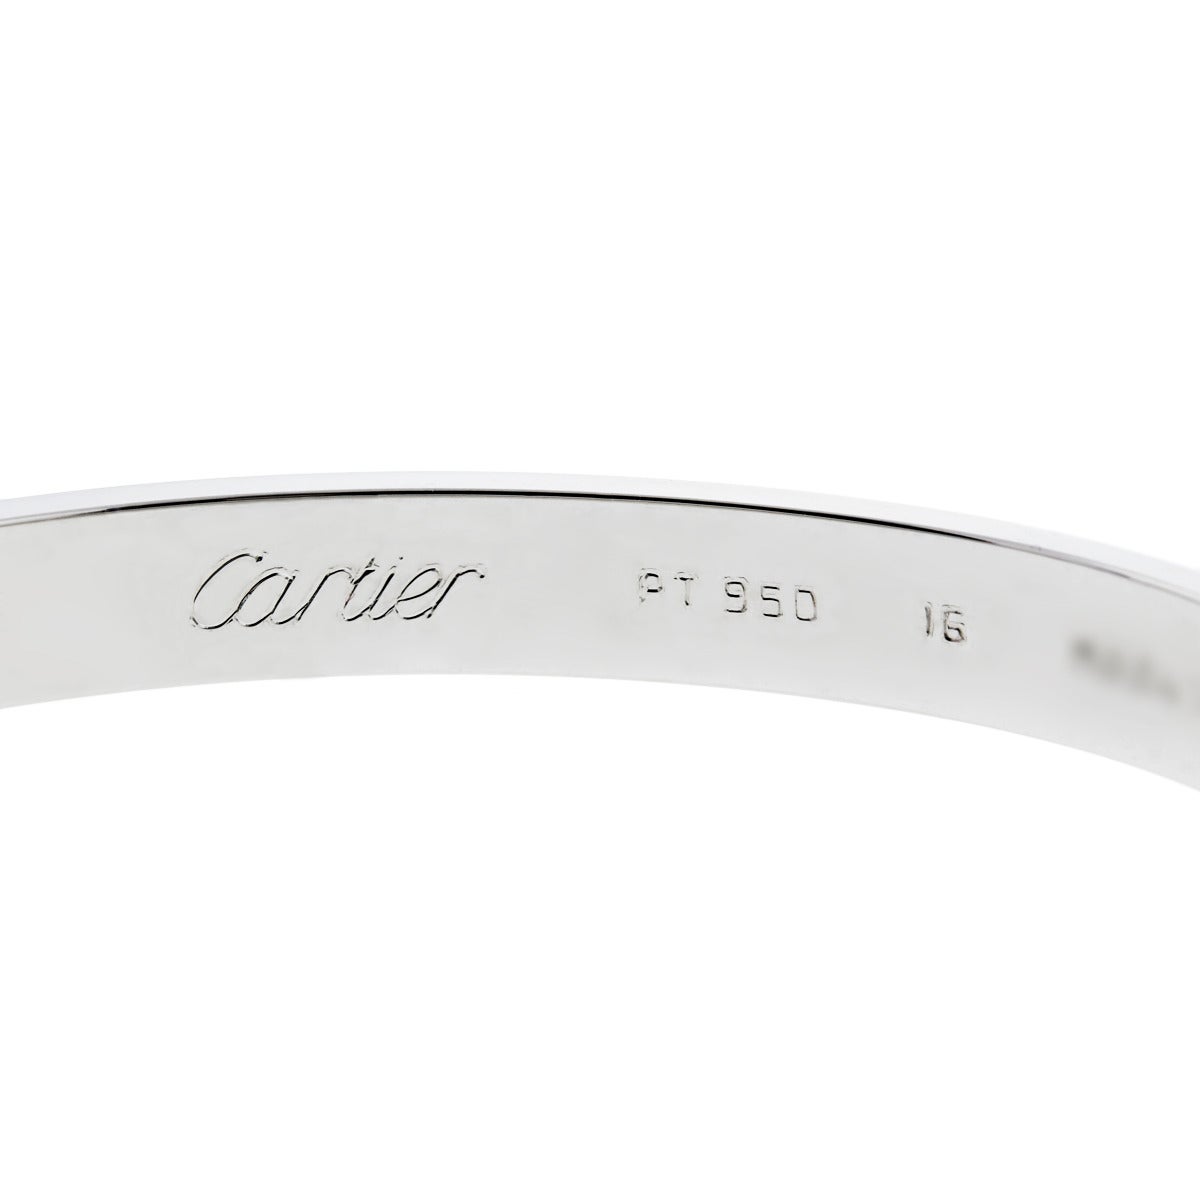 Cartier Platinum Love Bangle Bracelet Size 16, Comes complete with Box, Papers and Screwdriver